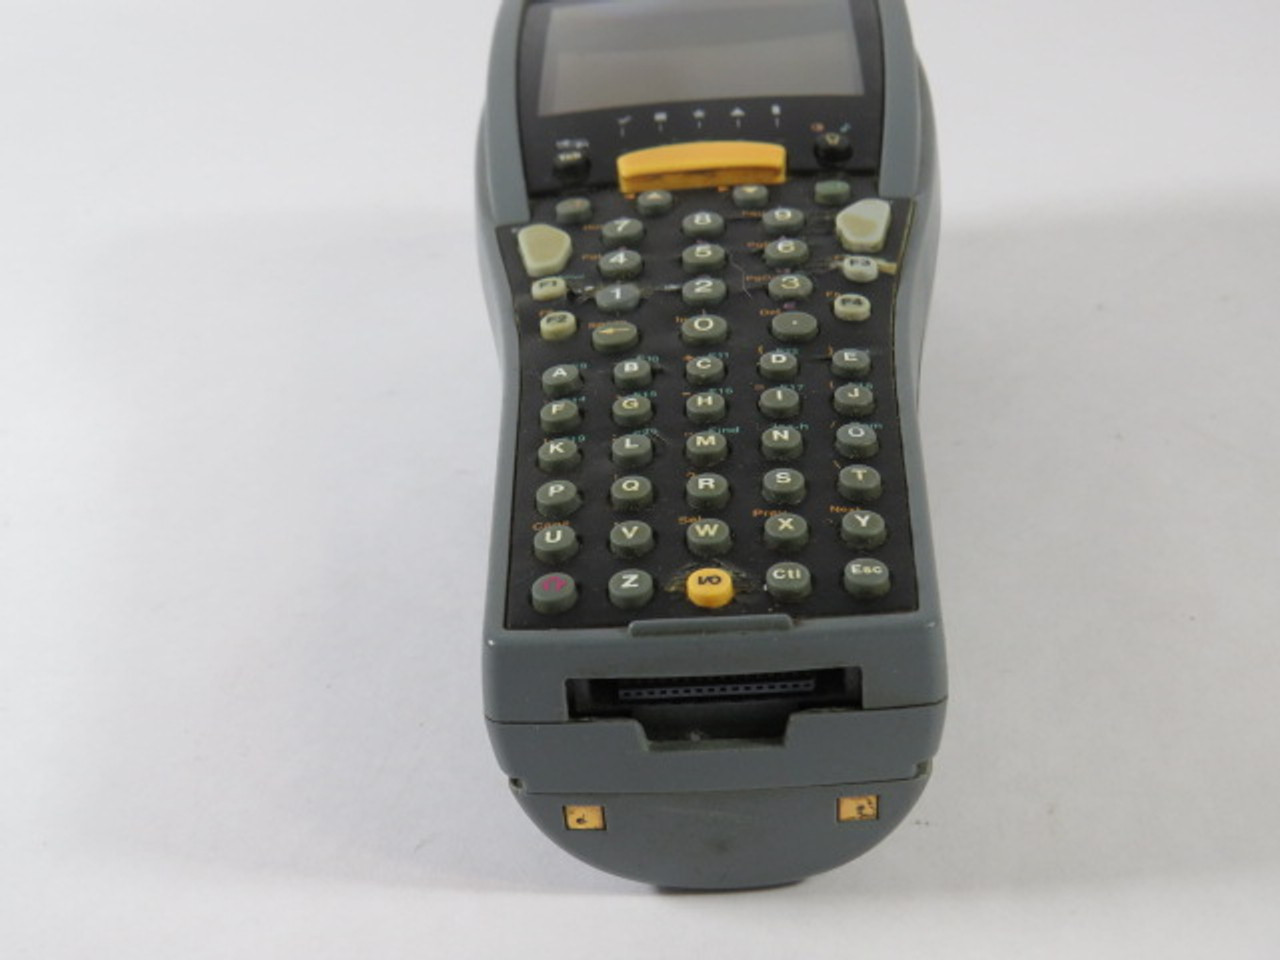 Intermec 2415 Handheld Computer 4V 1A Integrated 2.4GHZ Openair USED